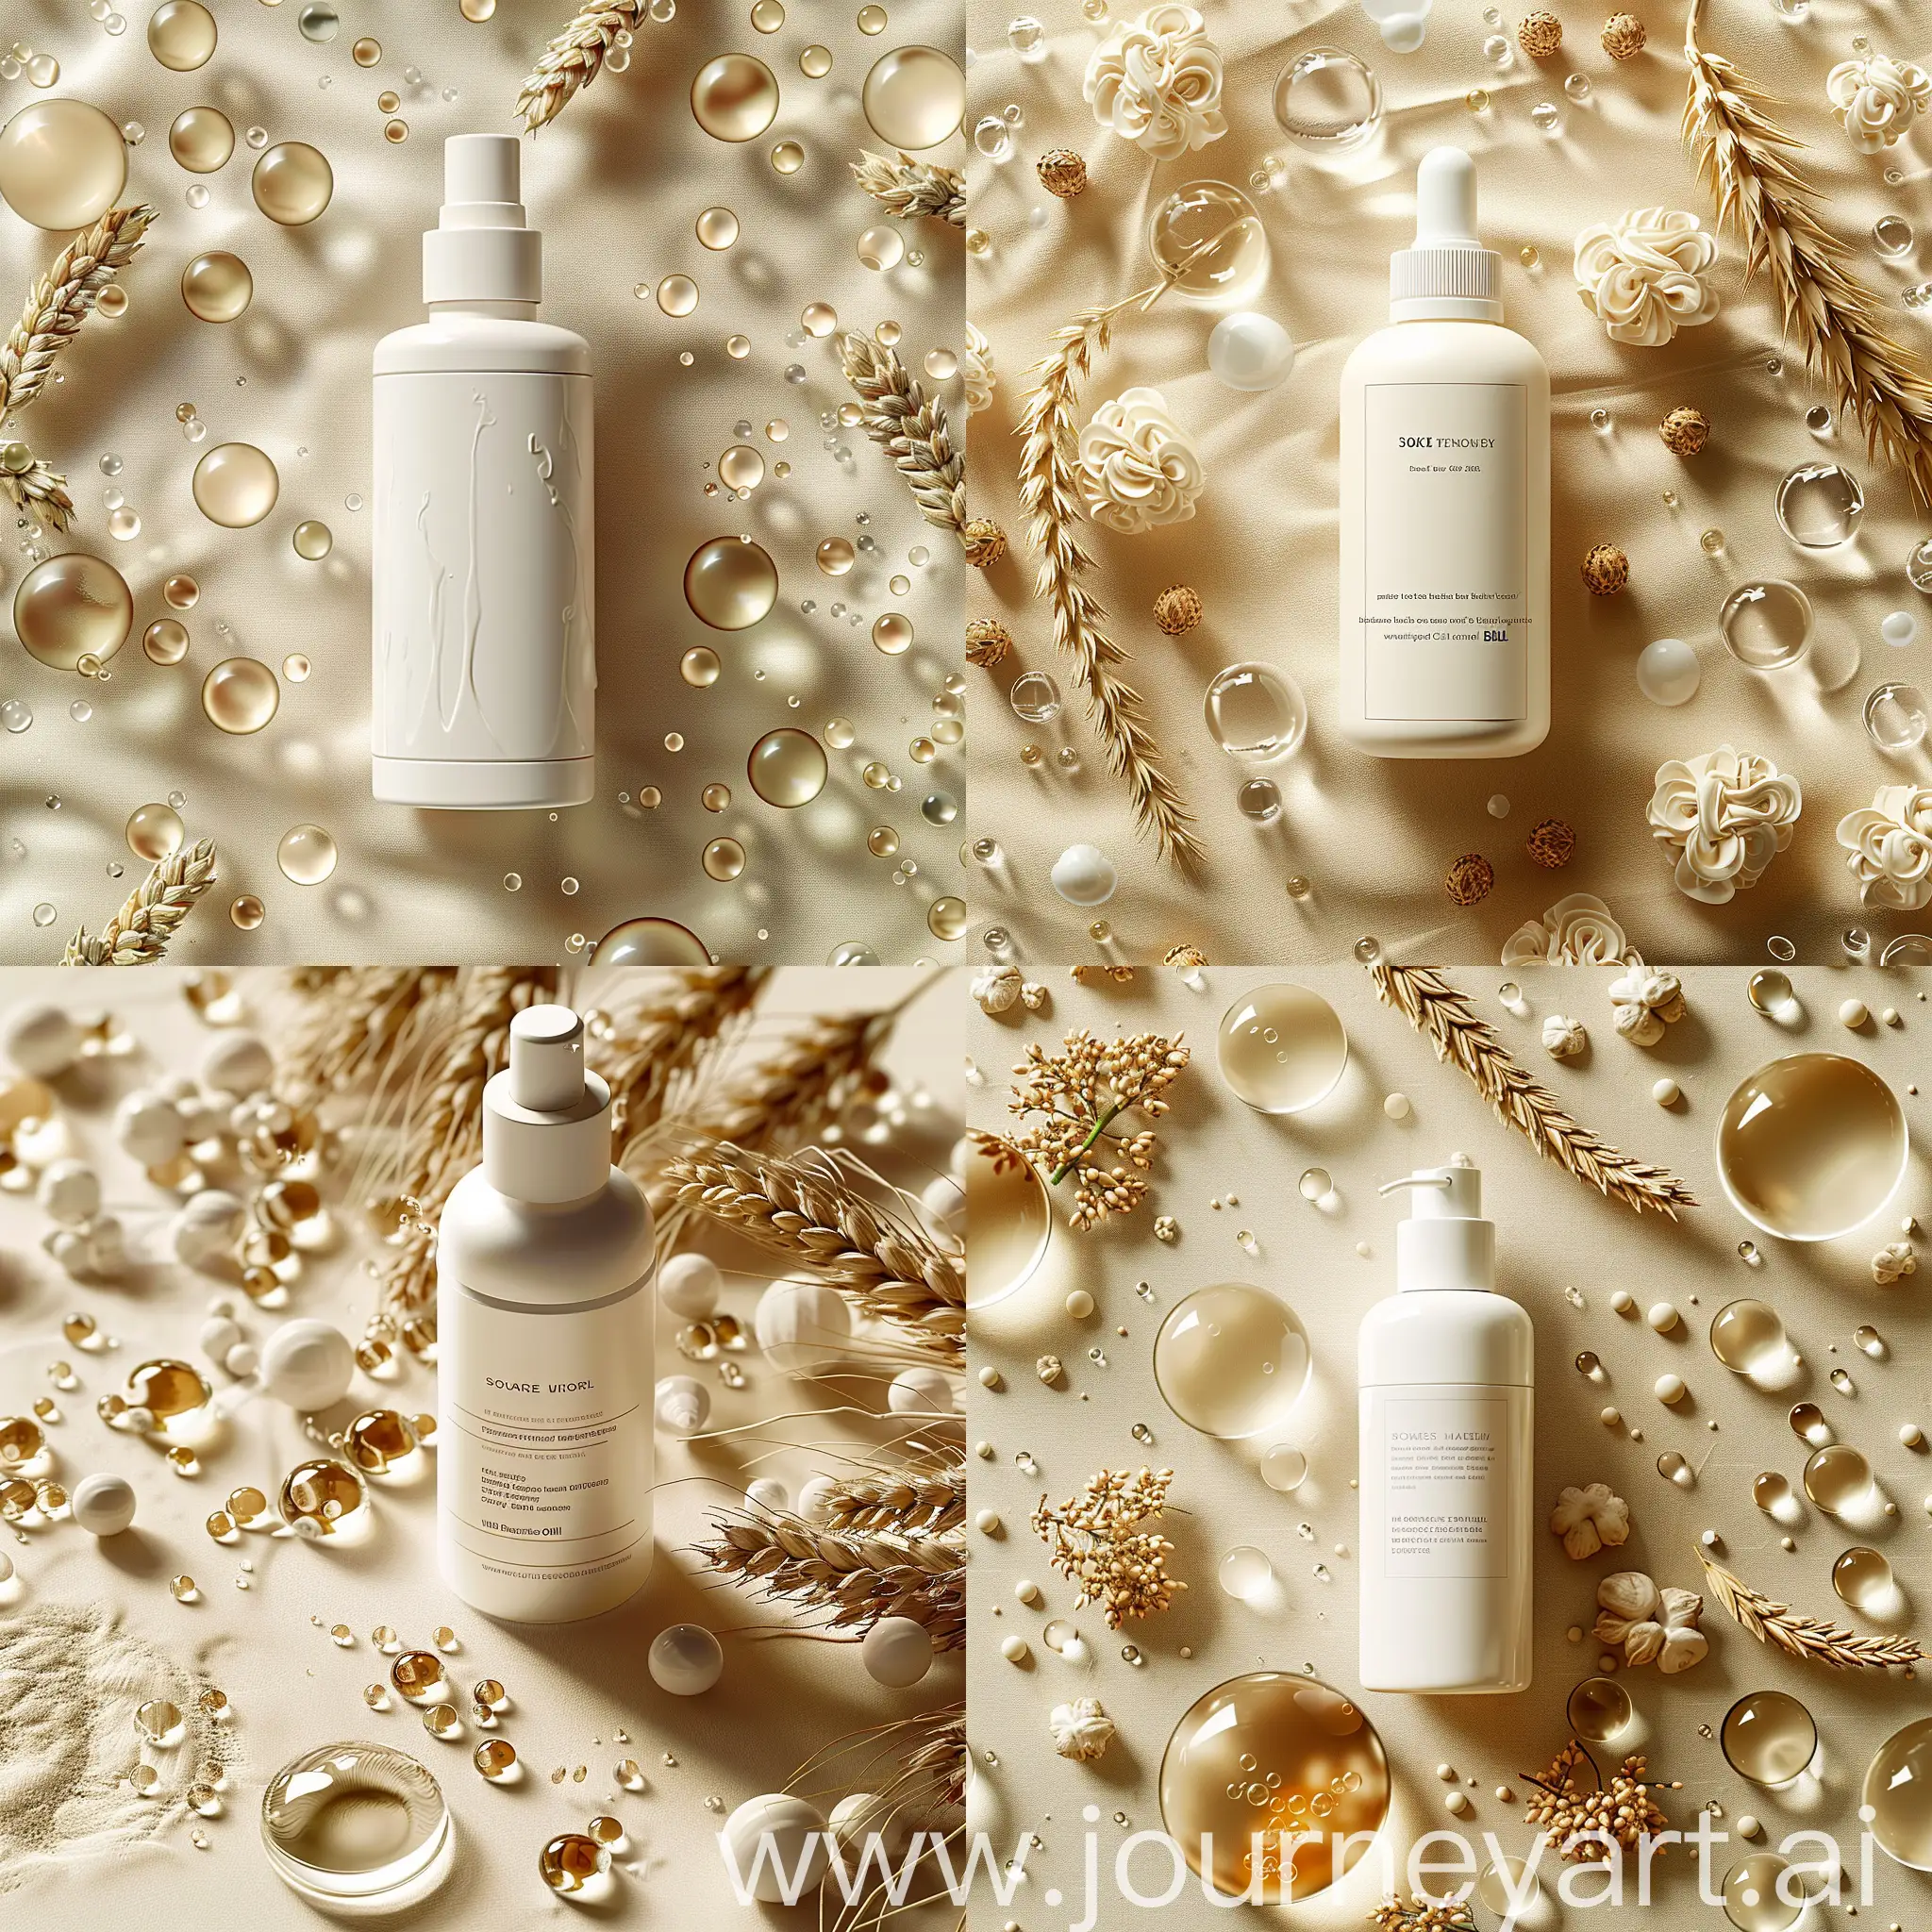 Luxurious-White-Moisturizer-with-Floating-Oil-Bubbles-on-Beige-Background